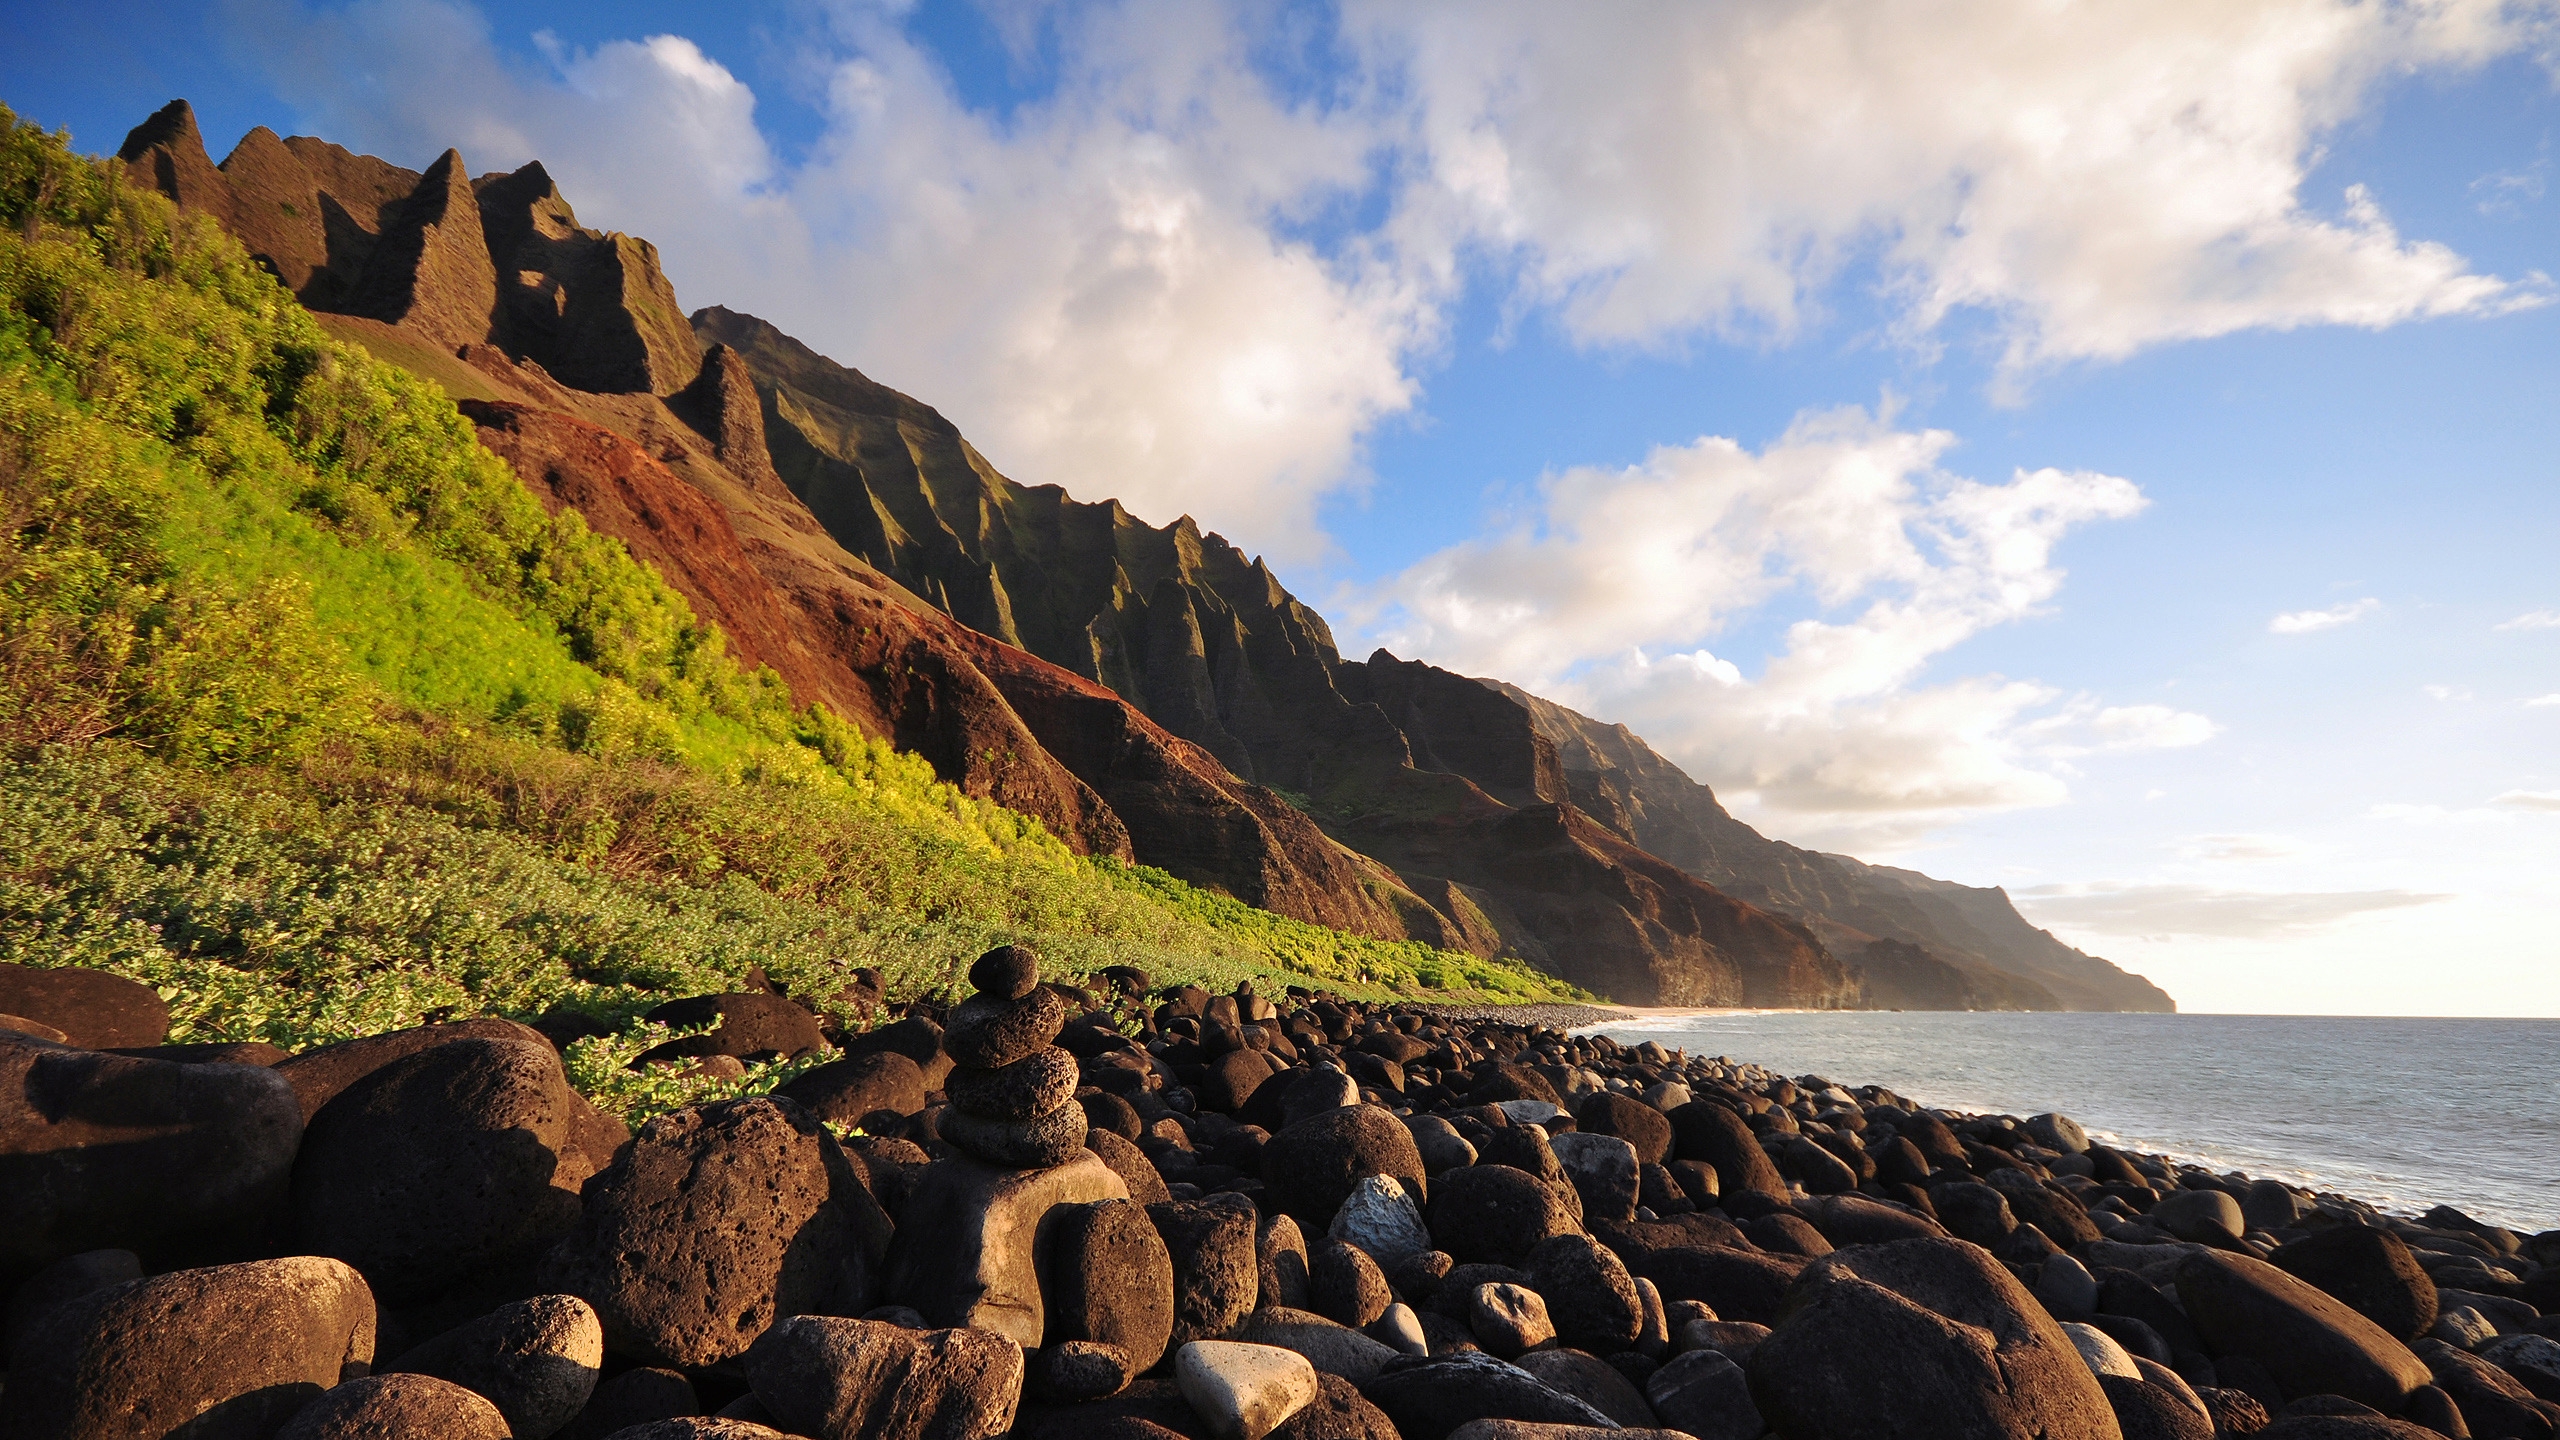 Na Pali Evening for 2560x1440 HDTV resolution